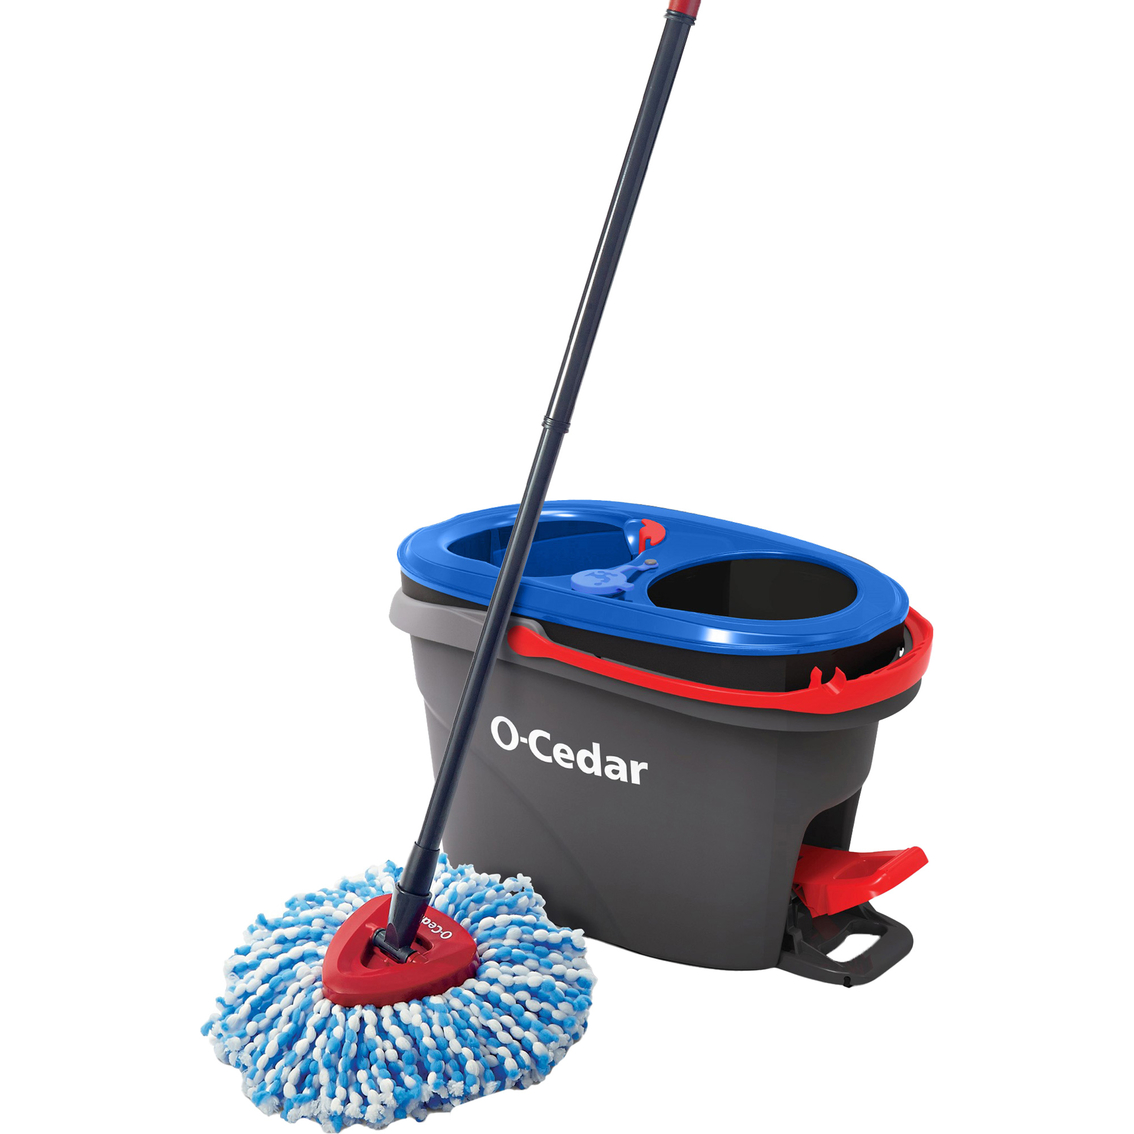 O-Cedar Easy Wring Rinse Clean Spin Mop and Bucket System - Image 2 of 3